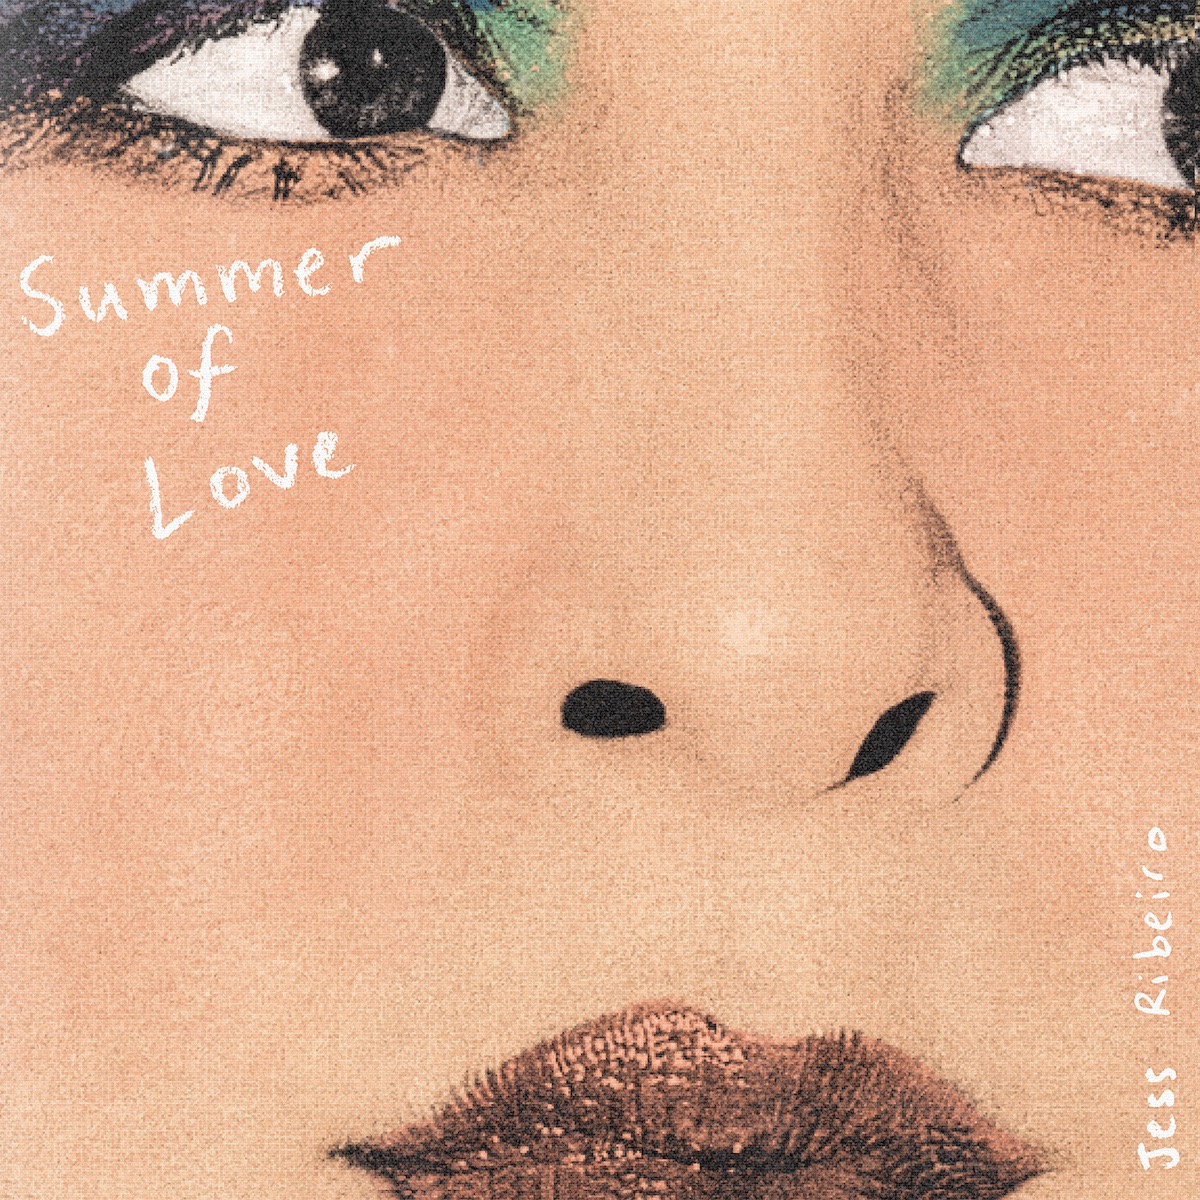 ALBUM REVIEW: Summer of Love by Jess Ribeiro